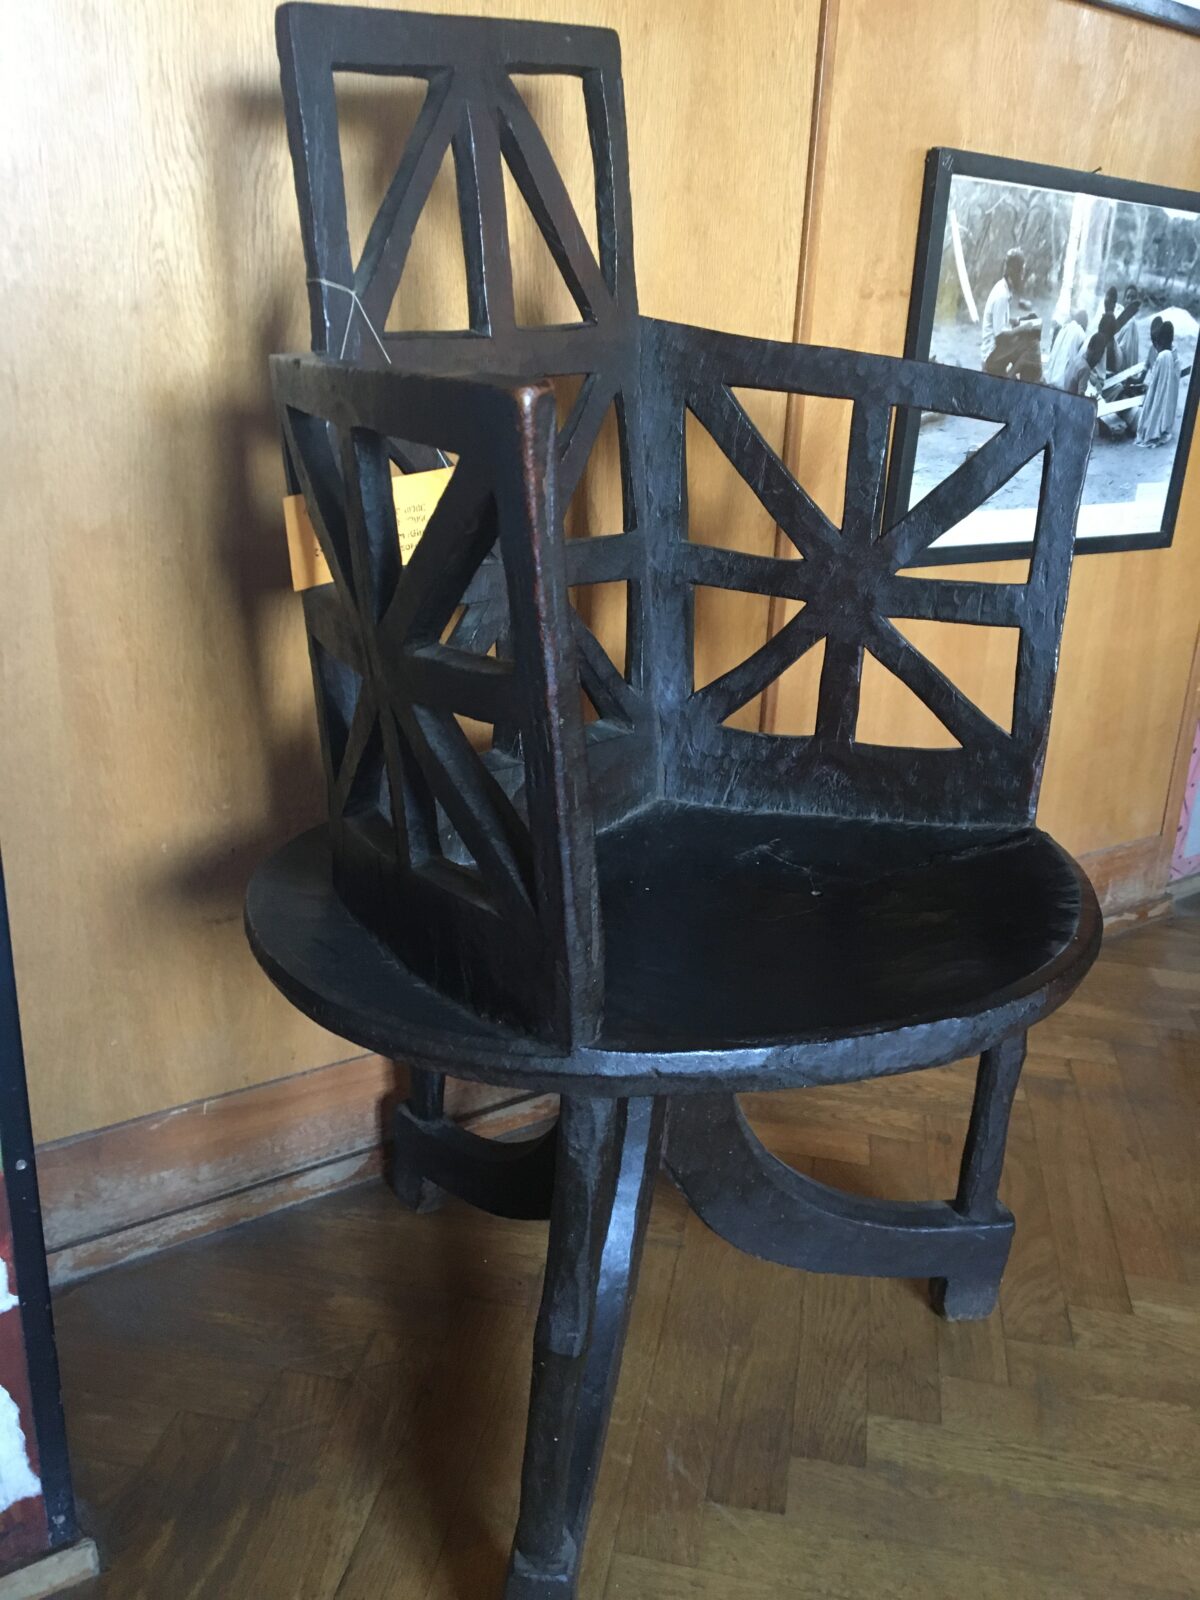 A very dark wooden chair with three swopping legs, a saucer-shaped seat, and a pierced-carving starburst pattern on its back rest and under its arms.